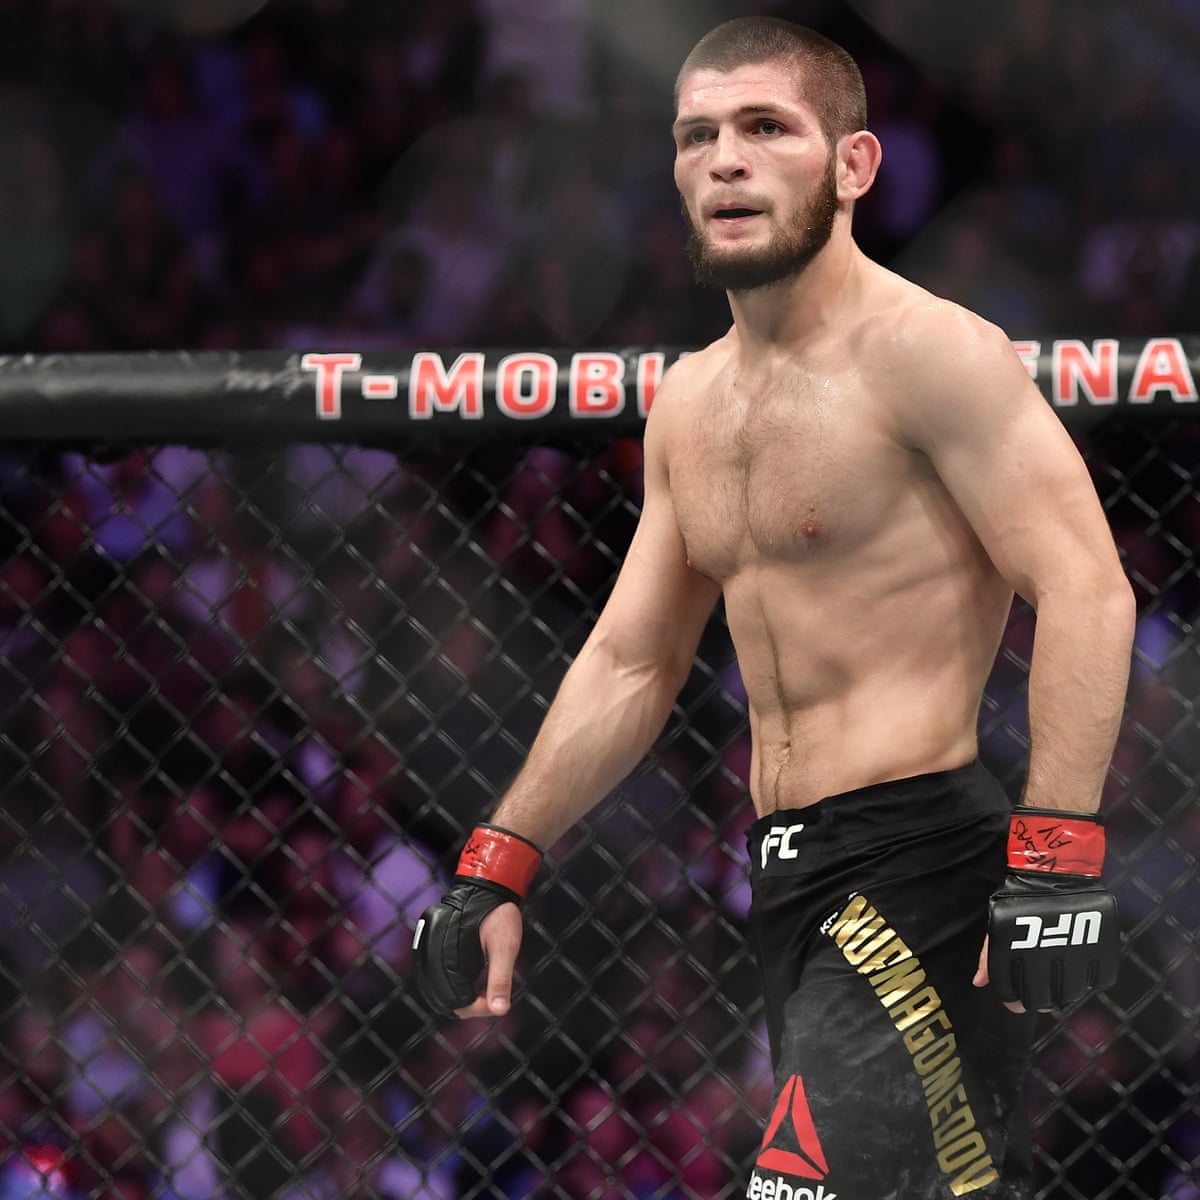 Khabib Nurmagomedov challenges Mayweather to fight: 'There is only one king' | UFC | The Guardian